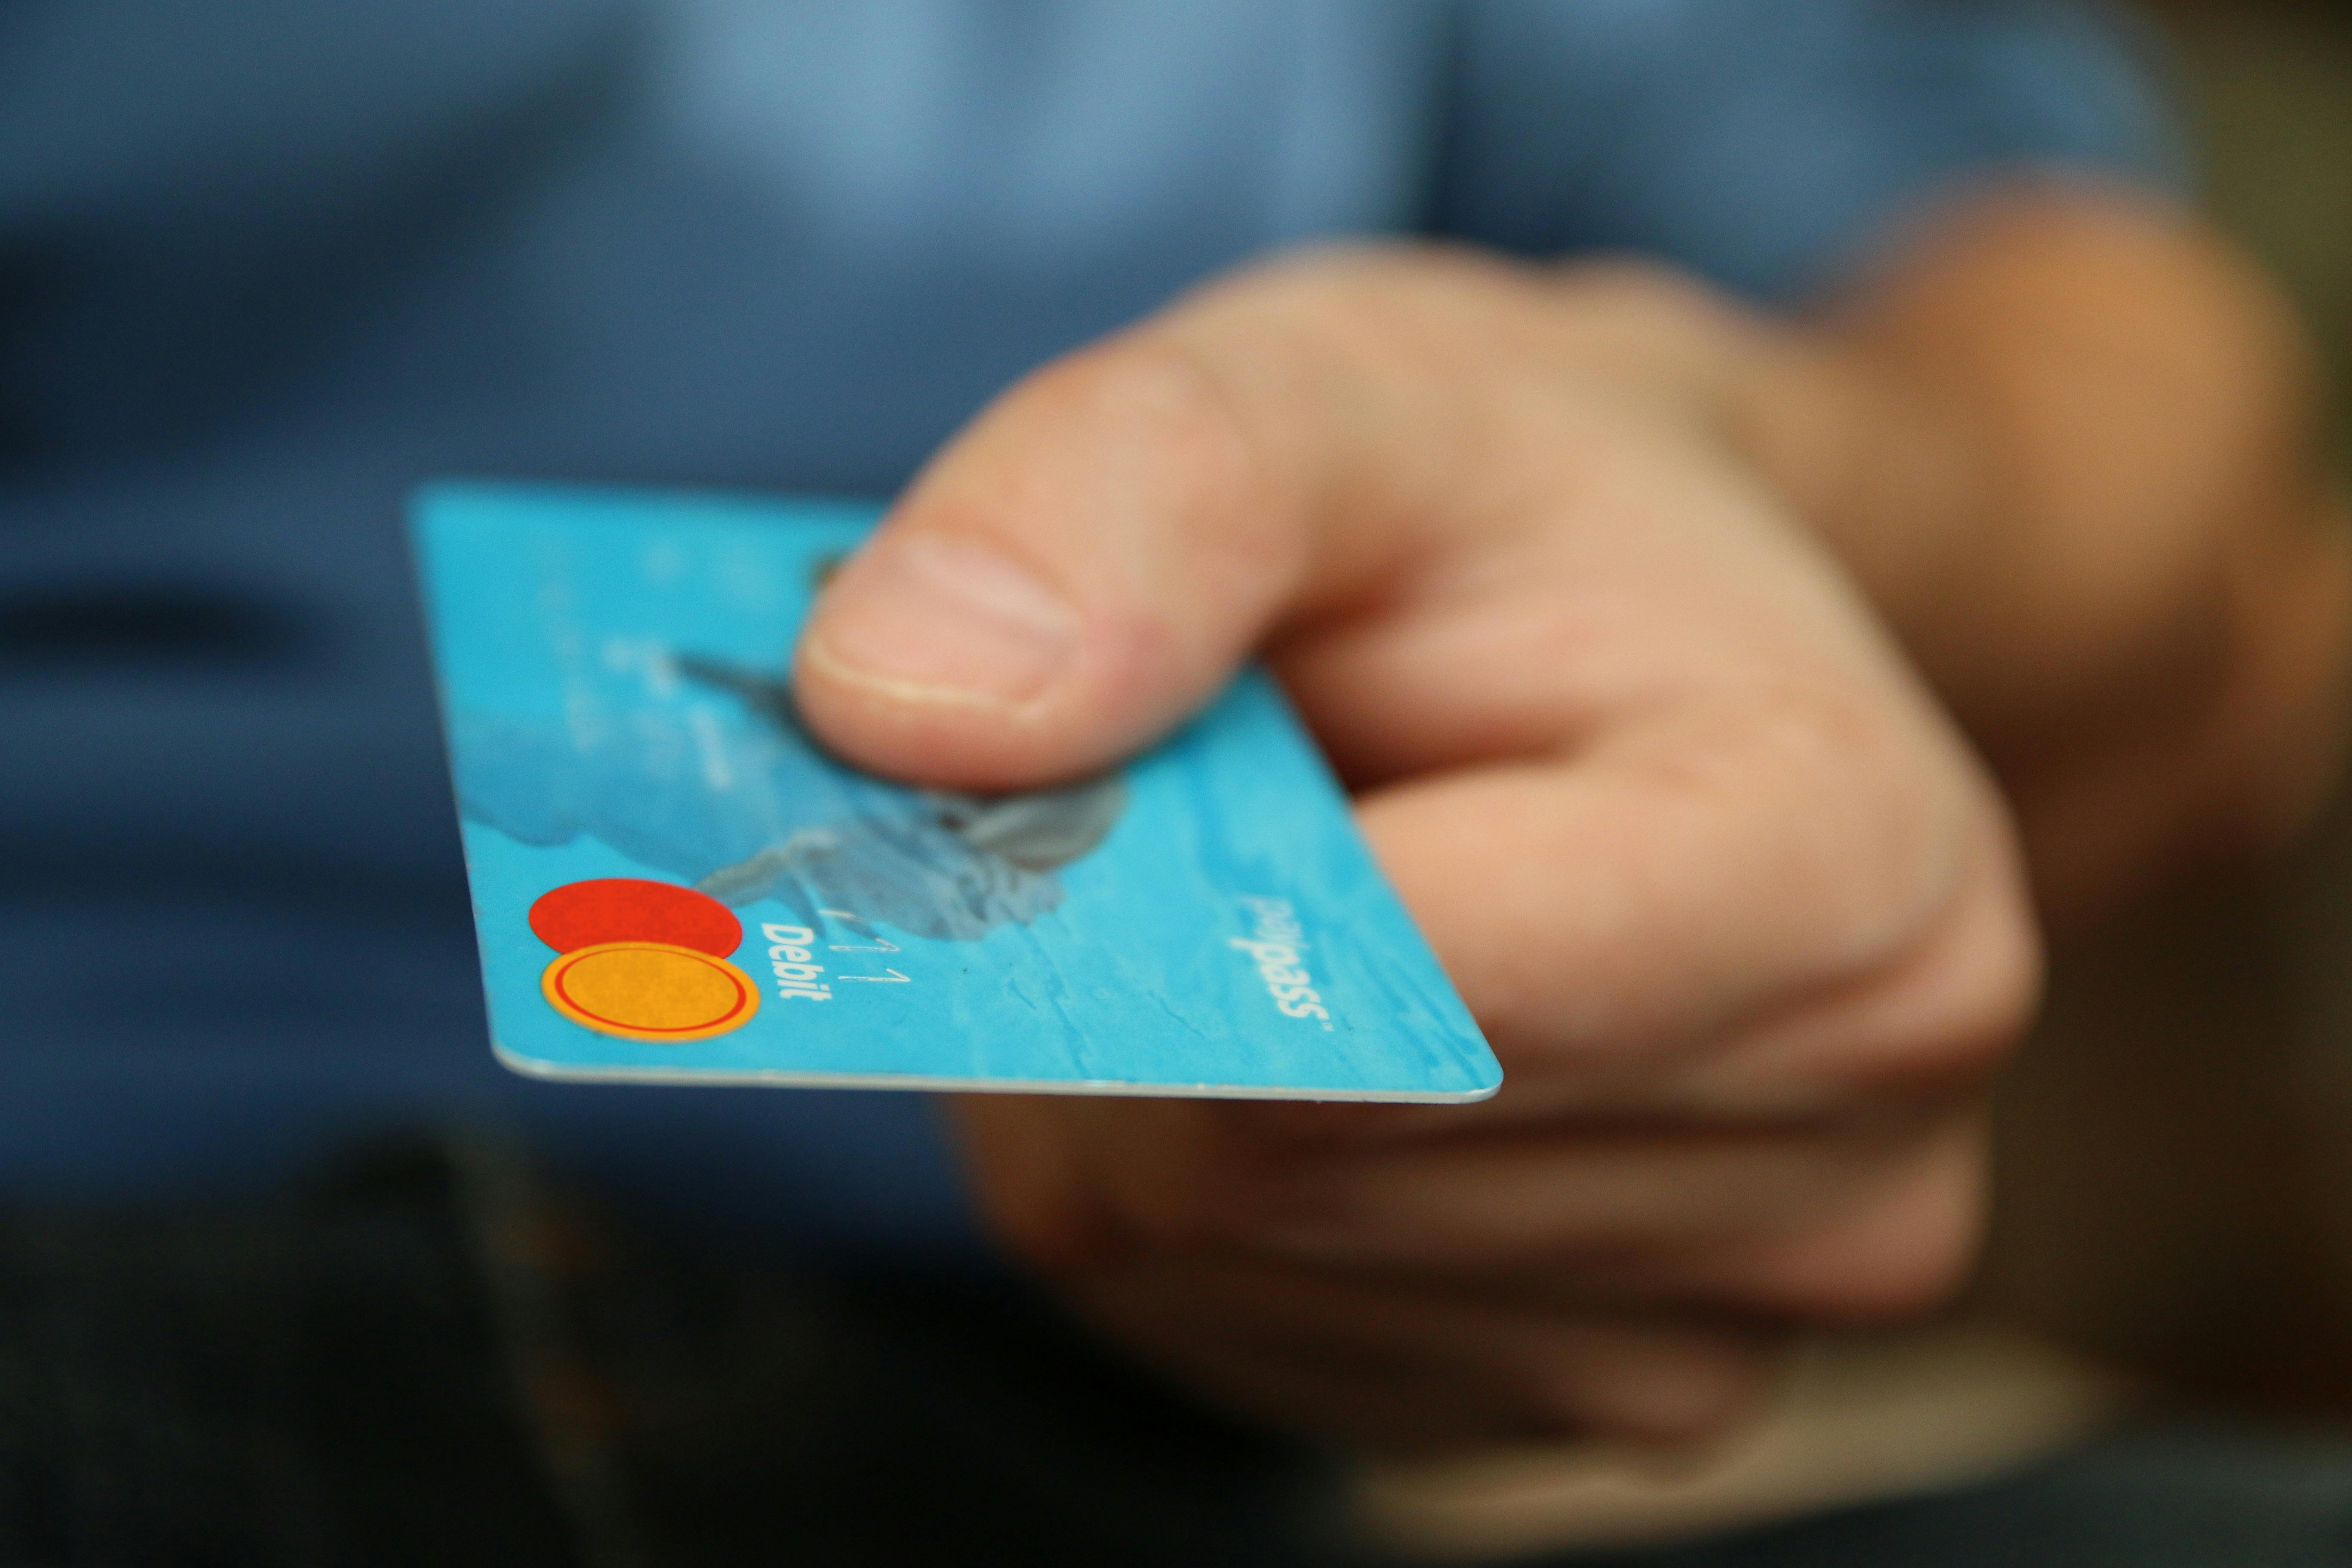 A man handing over a debit card to pay for something | Source: Pexels